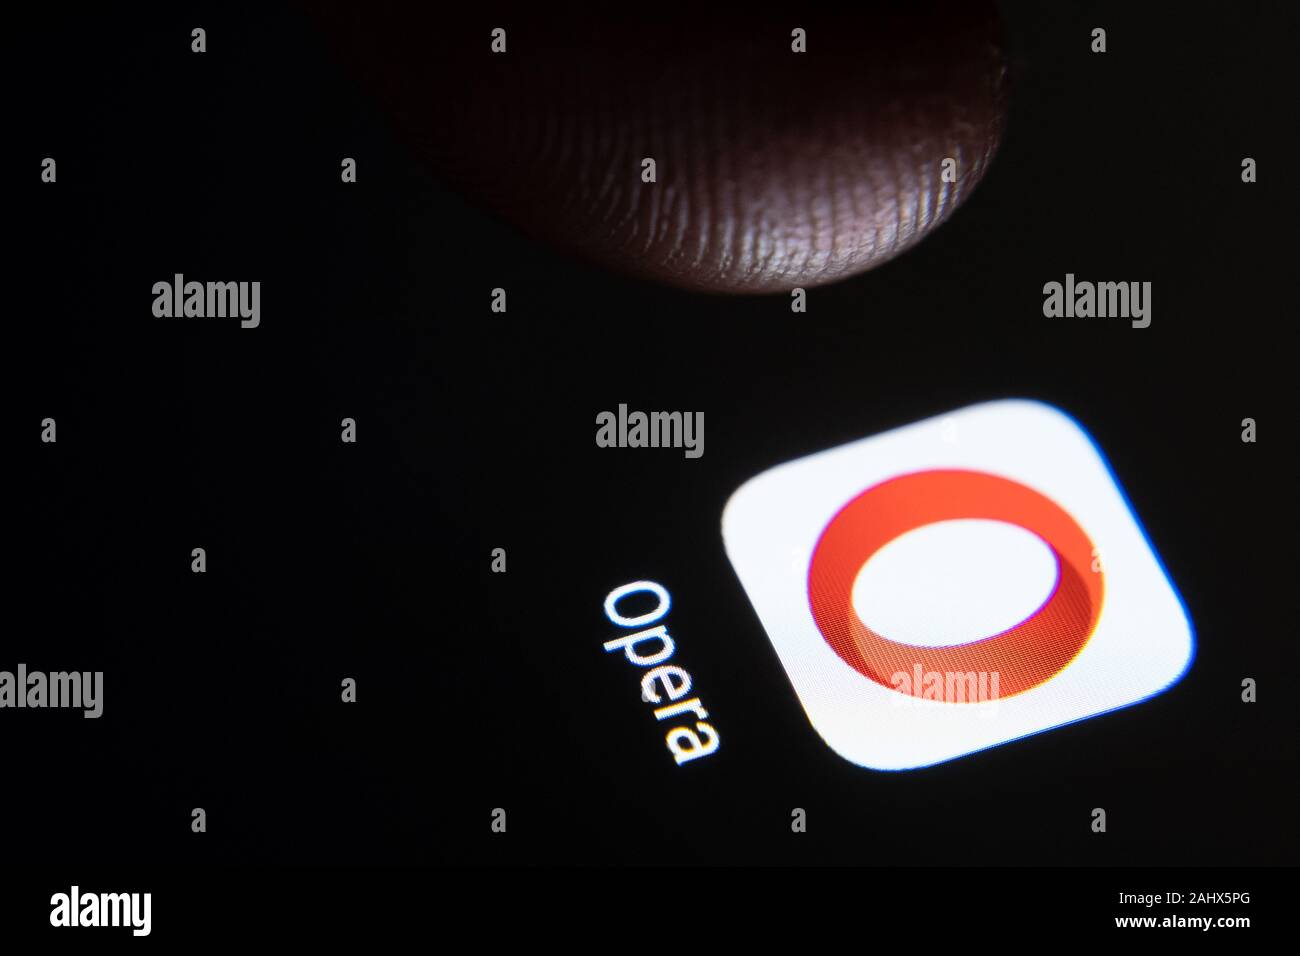 Opera browser app icon on the smartphone screen and finger launching it. Stock Photo